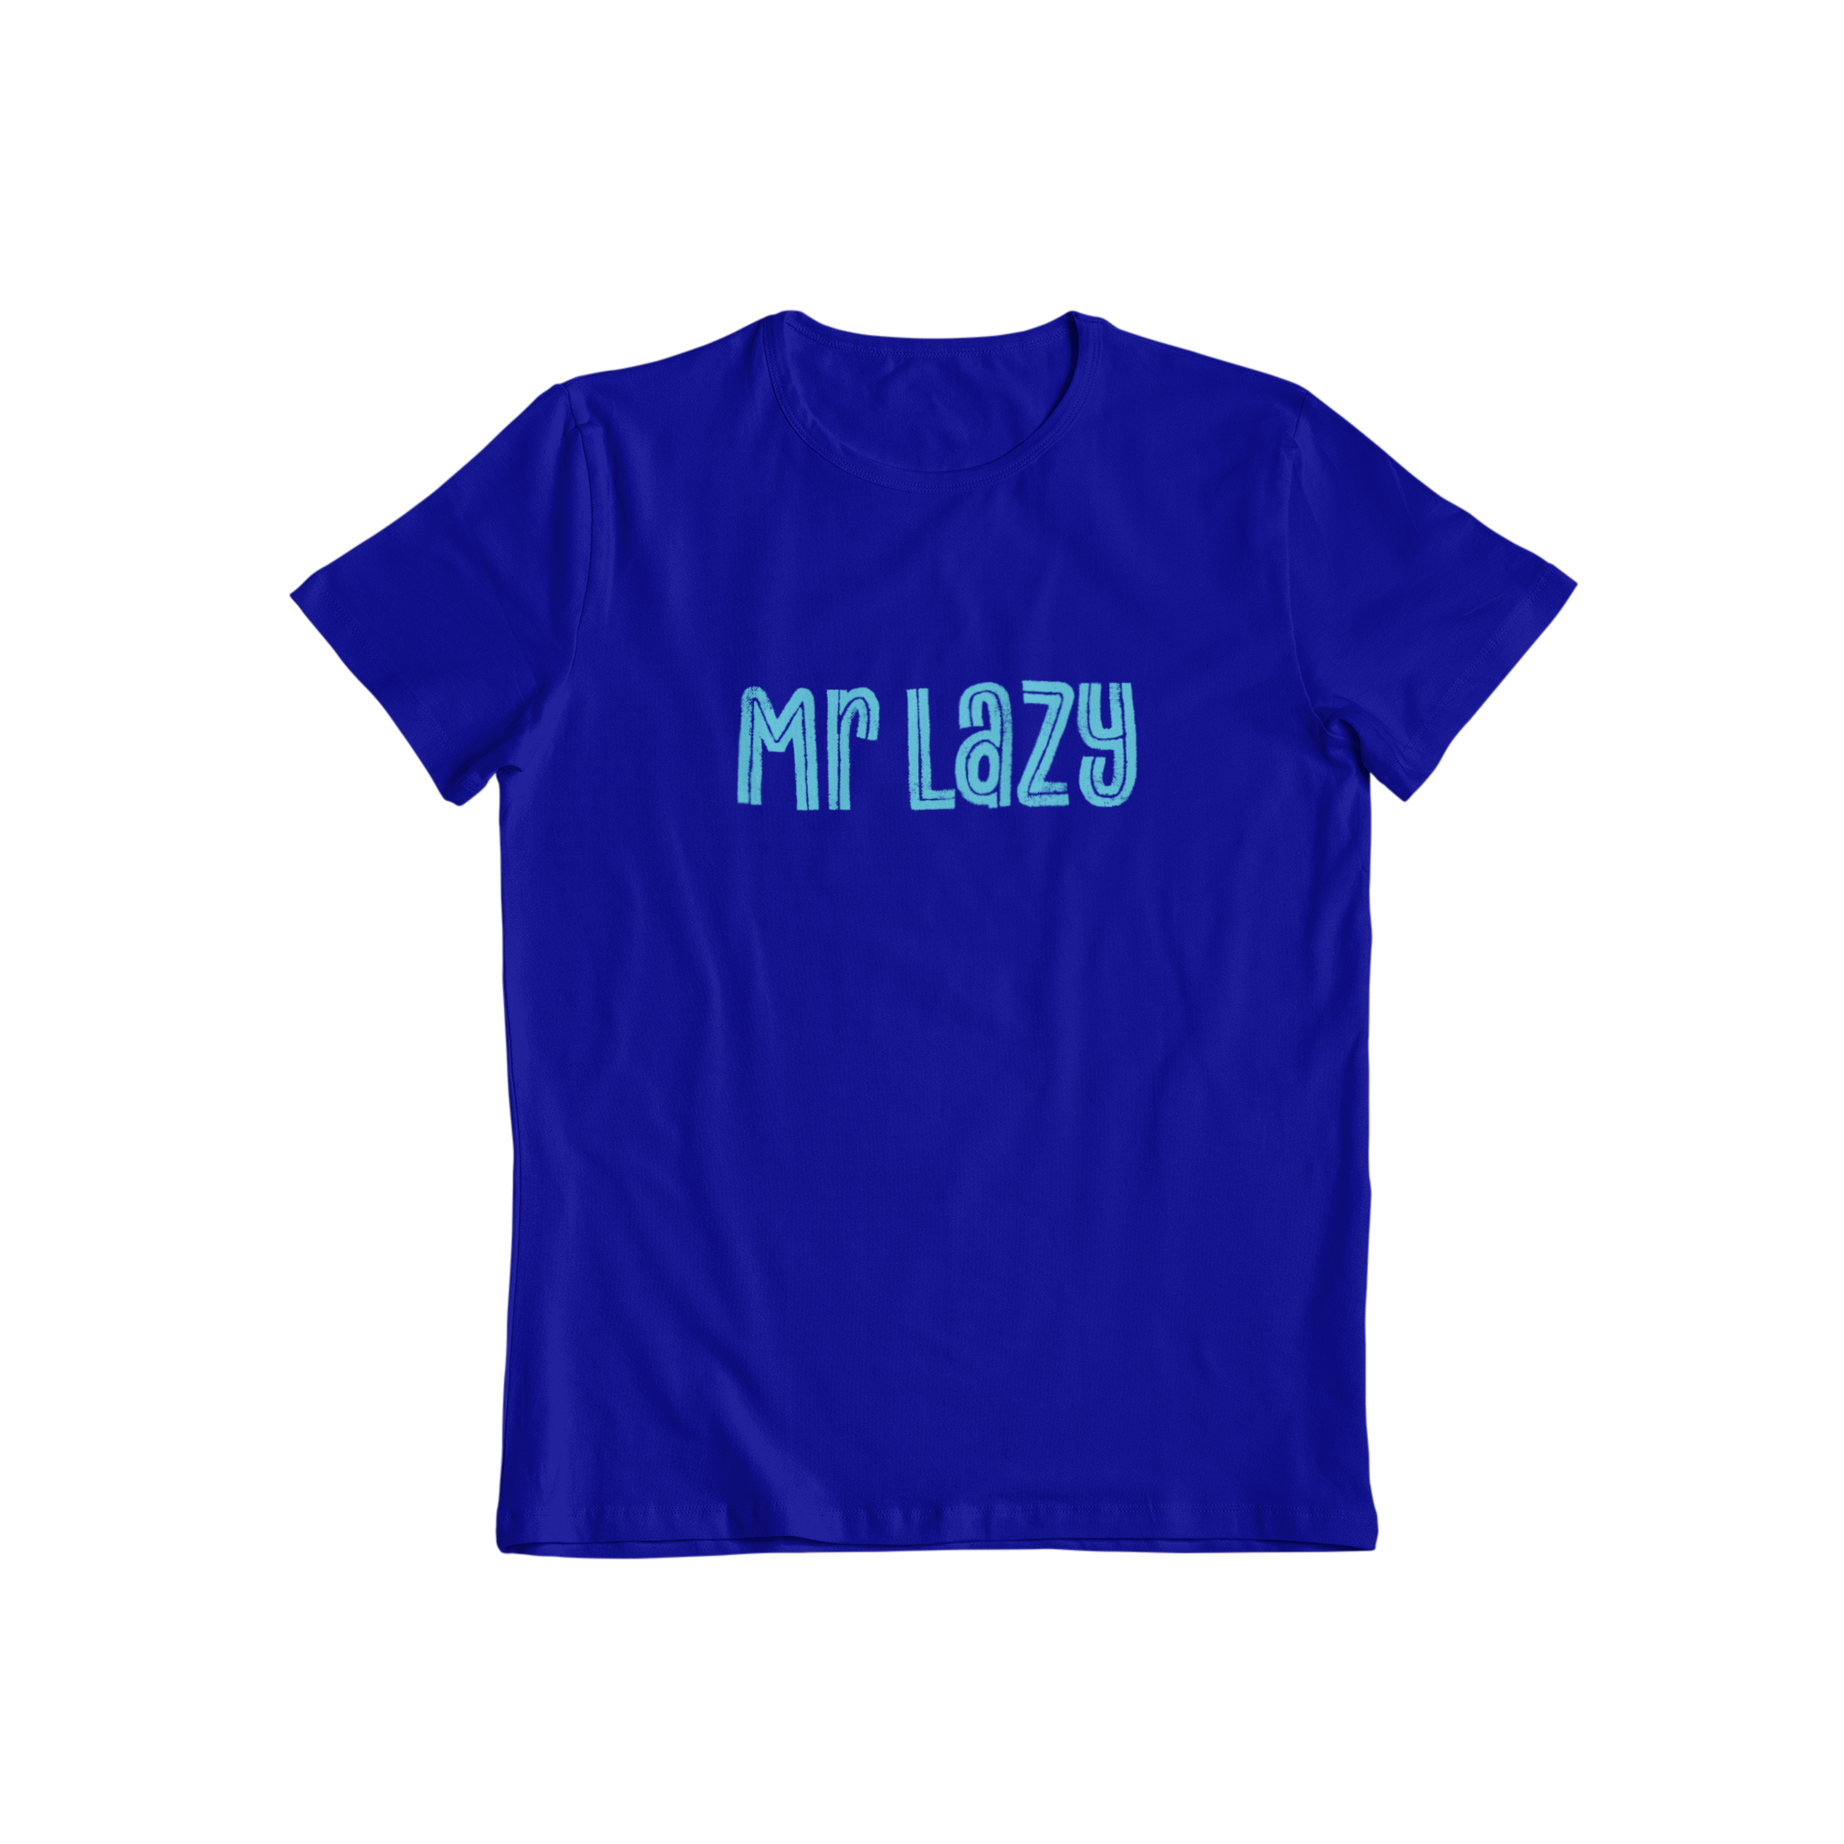 Introducing the Mr Lazy T-shirt, perfect for those who prefer a laid-back lifestyle. This matching slogan t-shirt features our iconic Mr Lazy character and pairs perfectly with our Miss Crazy t-shirt. Show off your relaxed attitude with this must-have t-shirt.